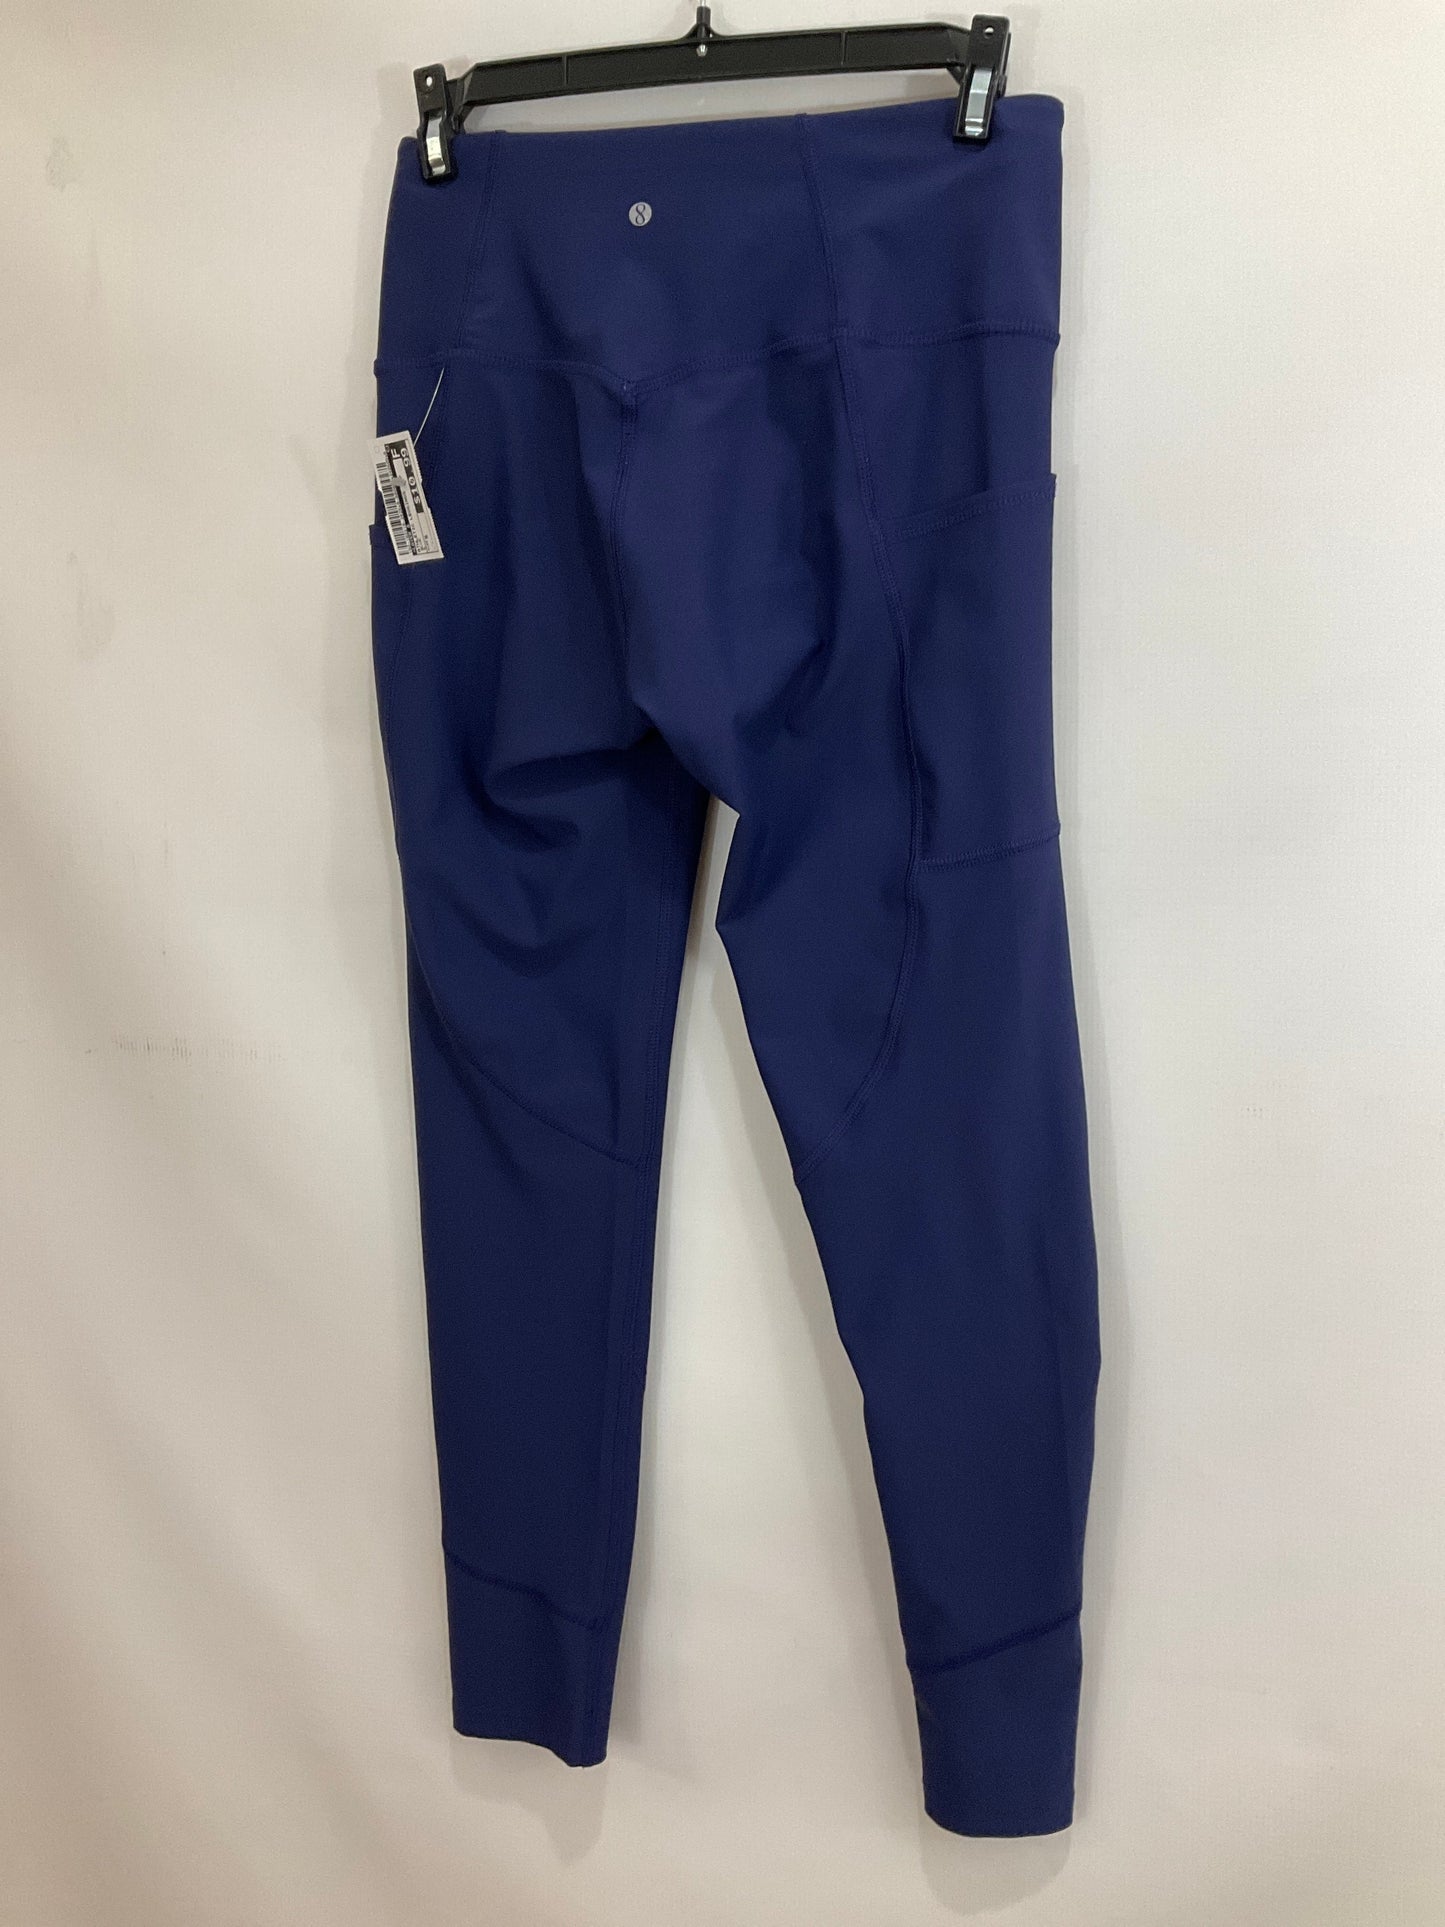 Blue Athletic Leggings Layer 8, Size S